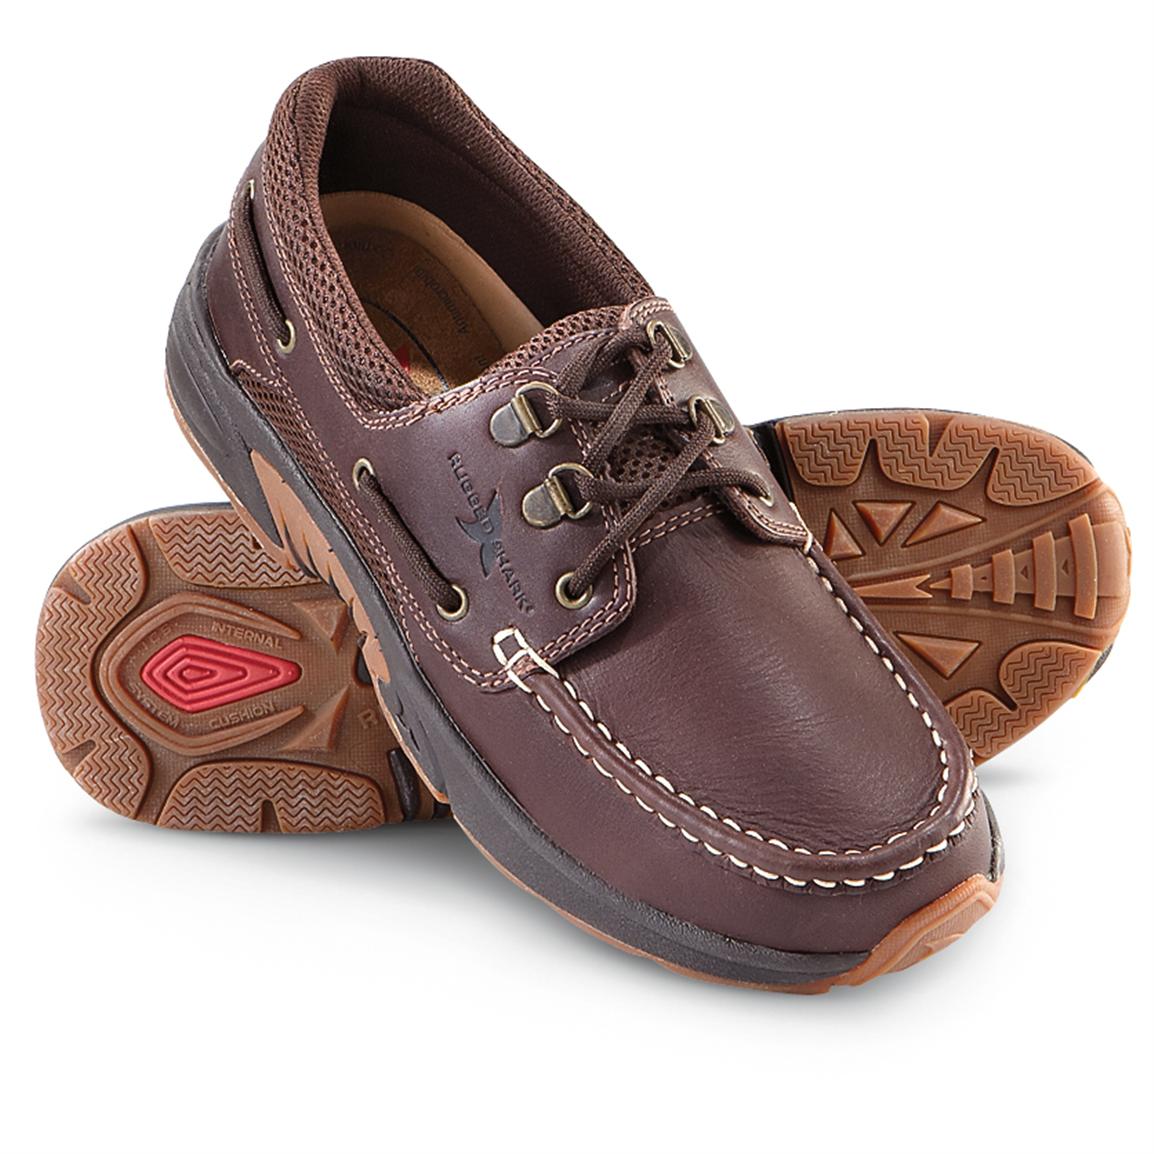 rugged boat shoes